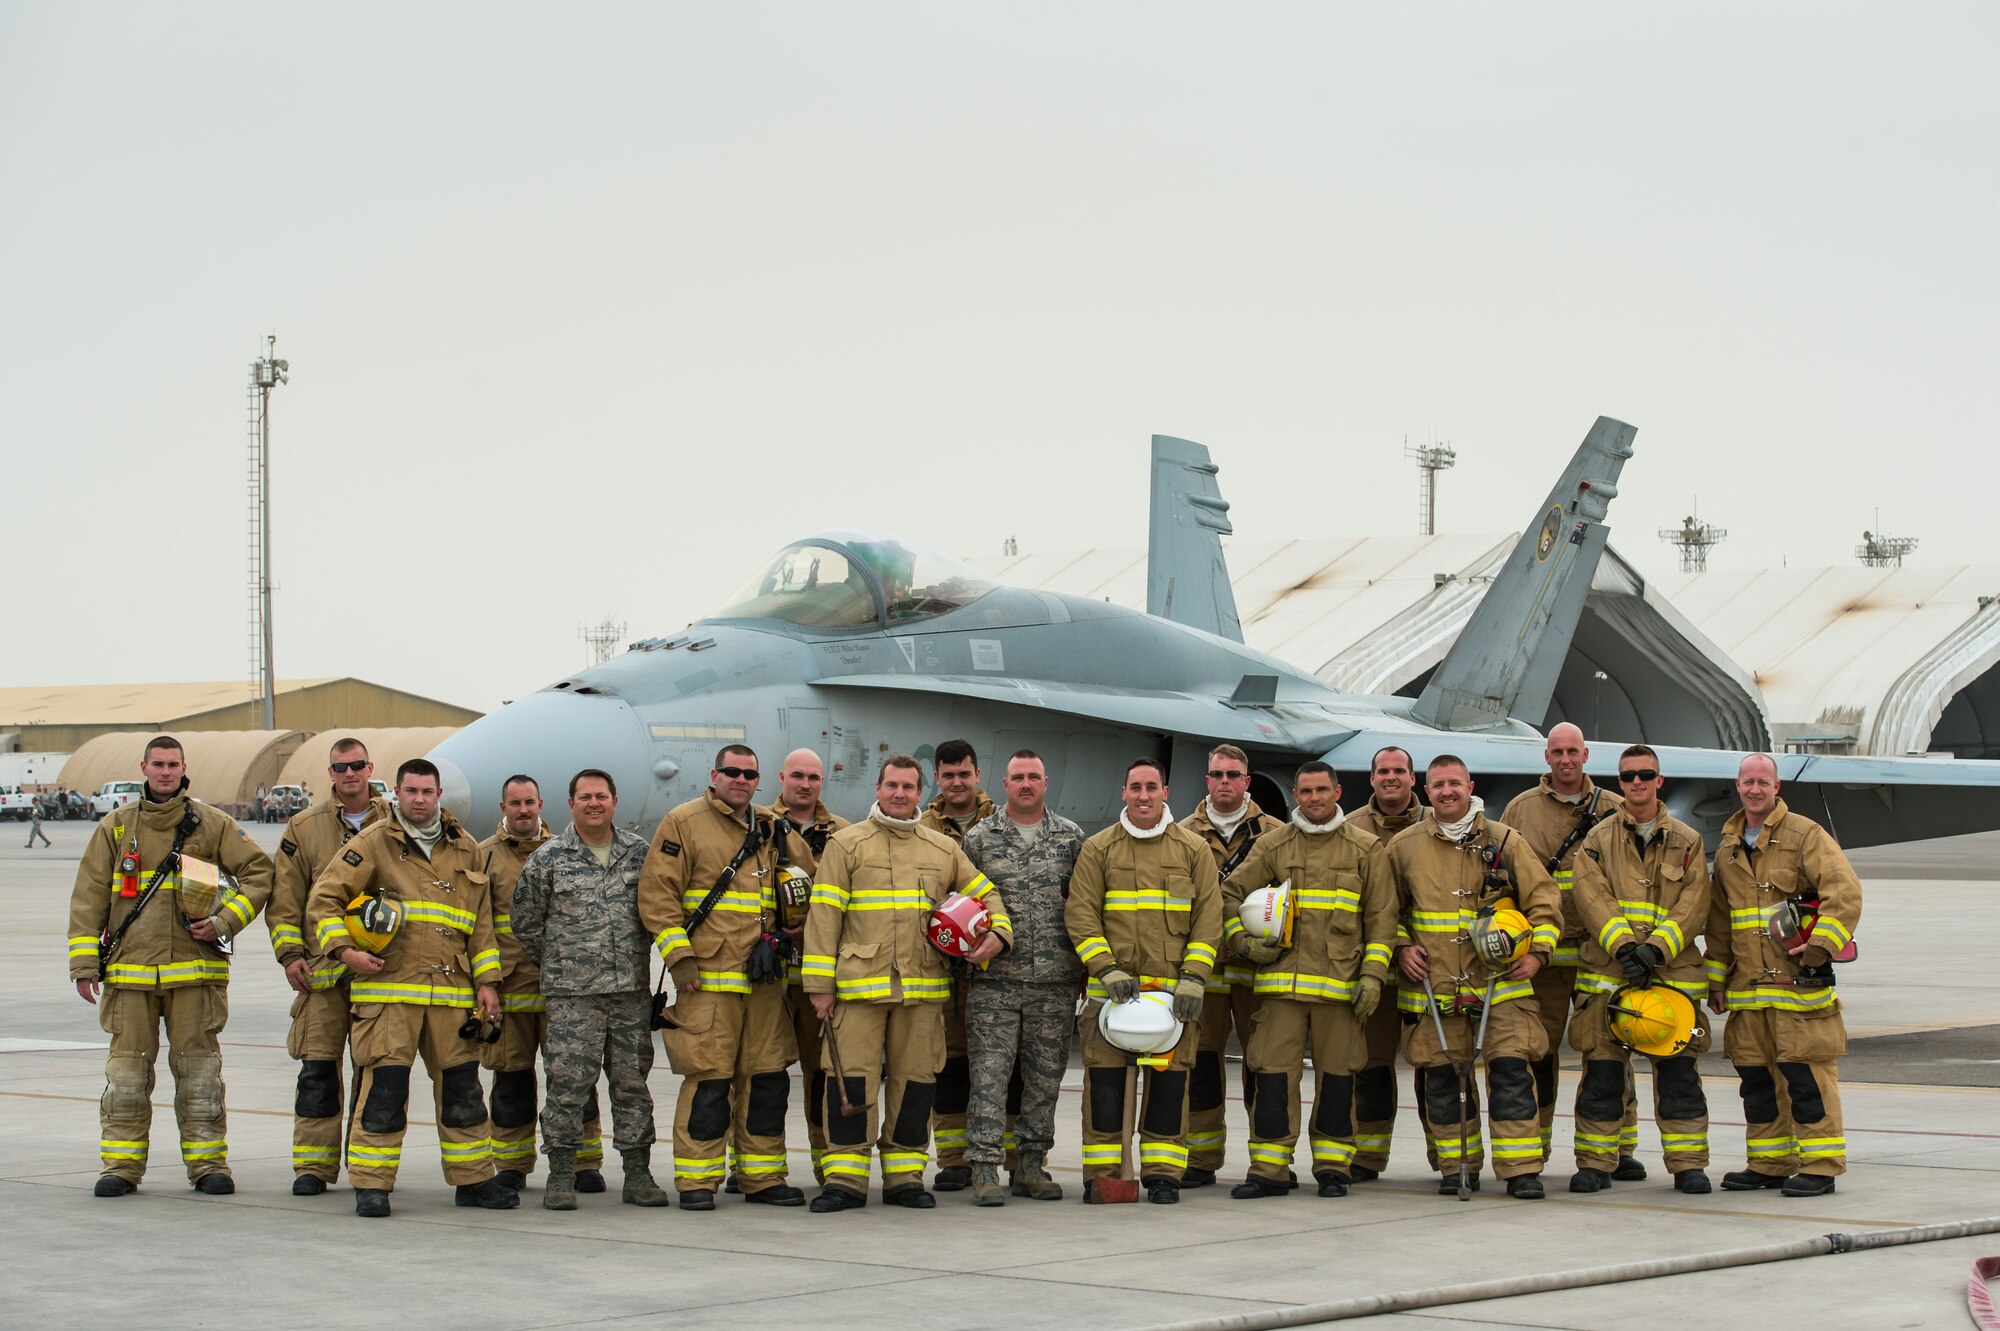 U.S. Air Force 380th Expeditionary Civil Engineer Squadron firefighters and Royal Australian Air Force firefighters pose for a group photo after completing a Coalition training exercise at an undisclosed location in Southwest Asia, March 16, 2017. USAF and RAAF firefighters have completed weekly exercises for nearly three months while supporting Operation Inherent Resolve. The training scenarios have developed critical firefighting fundamentals required during deployed day-to-day operations. (U.S. Air Force photo/Senior Airman Tyler Woodward)